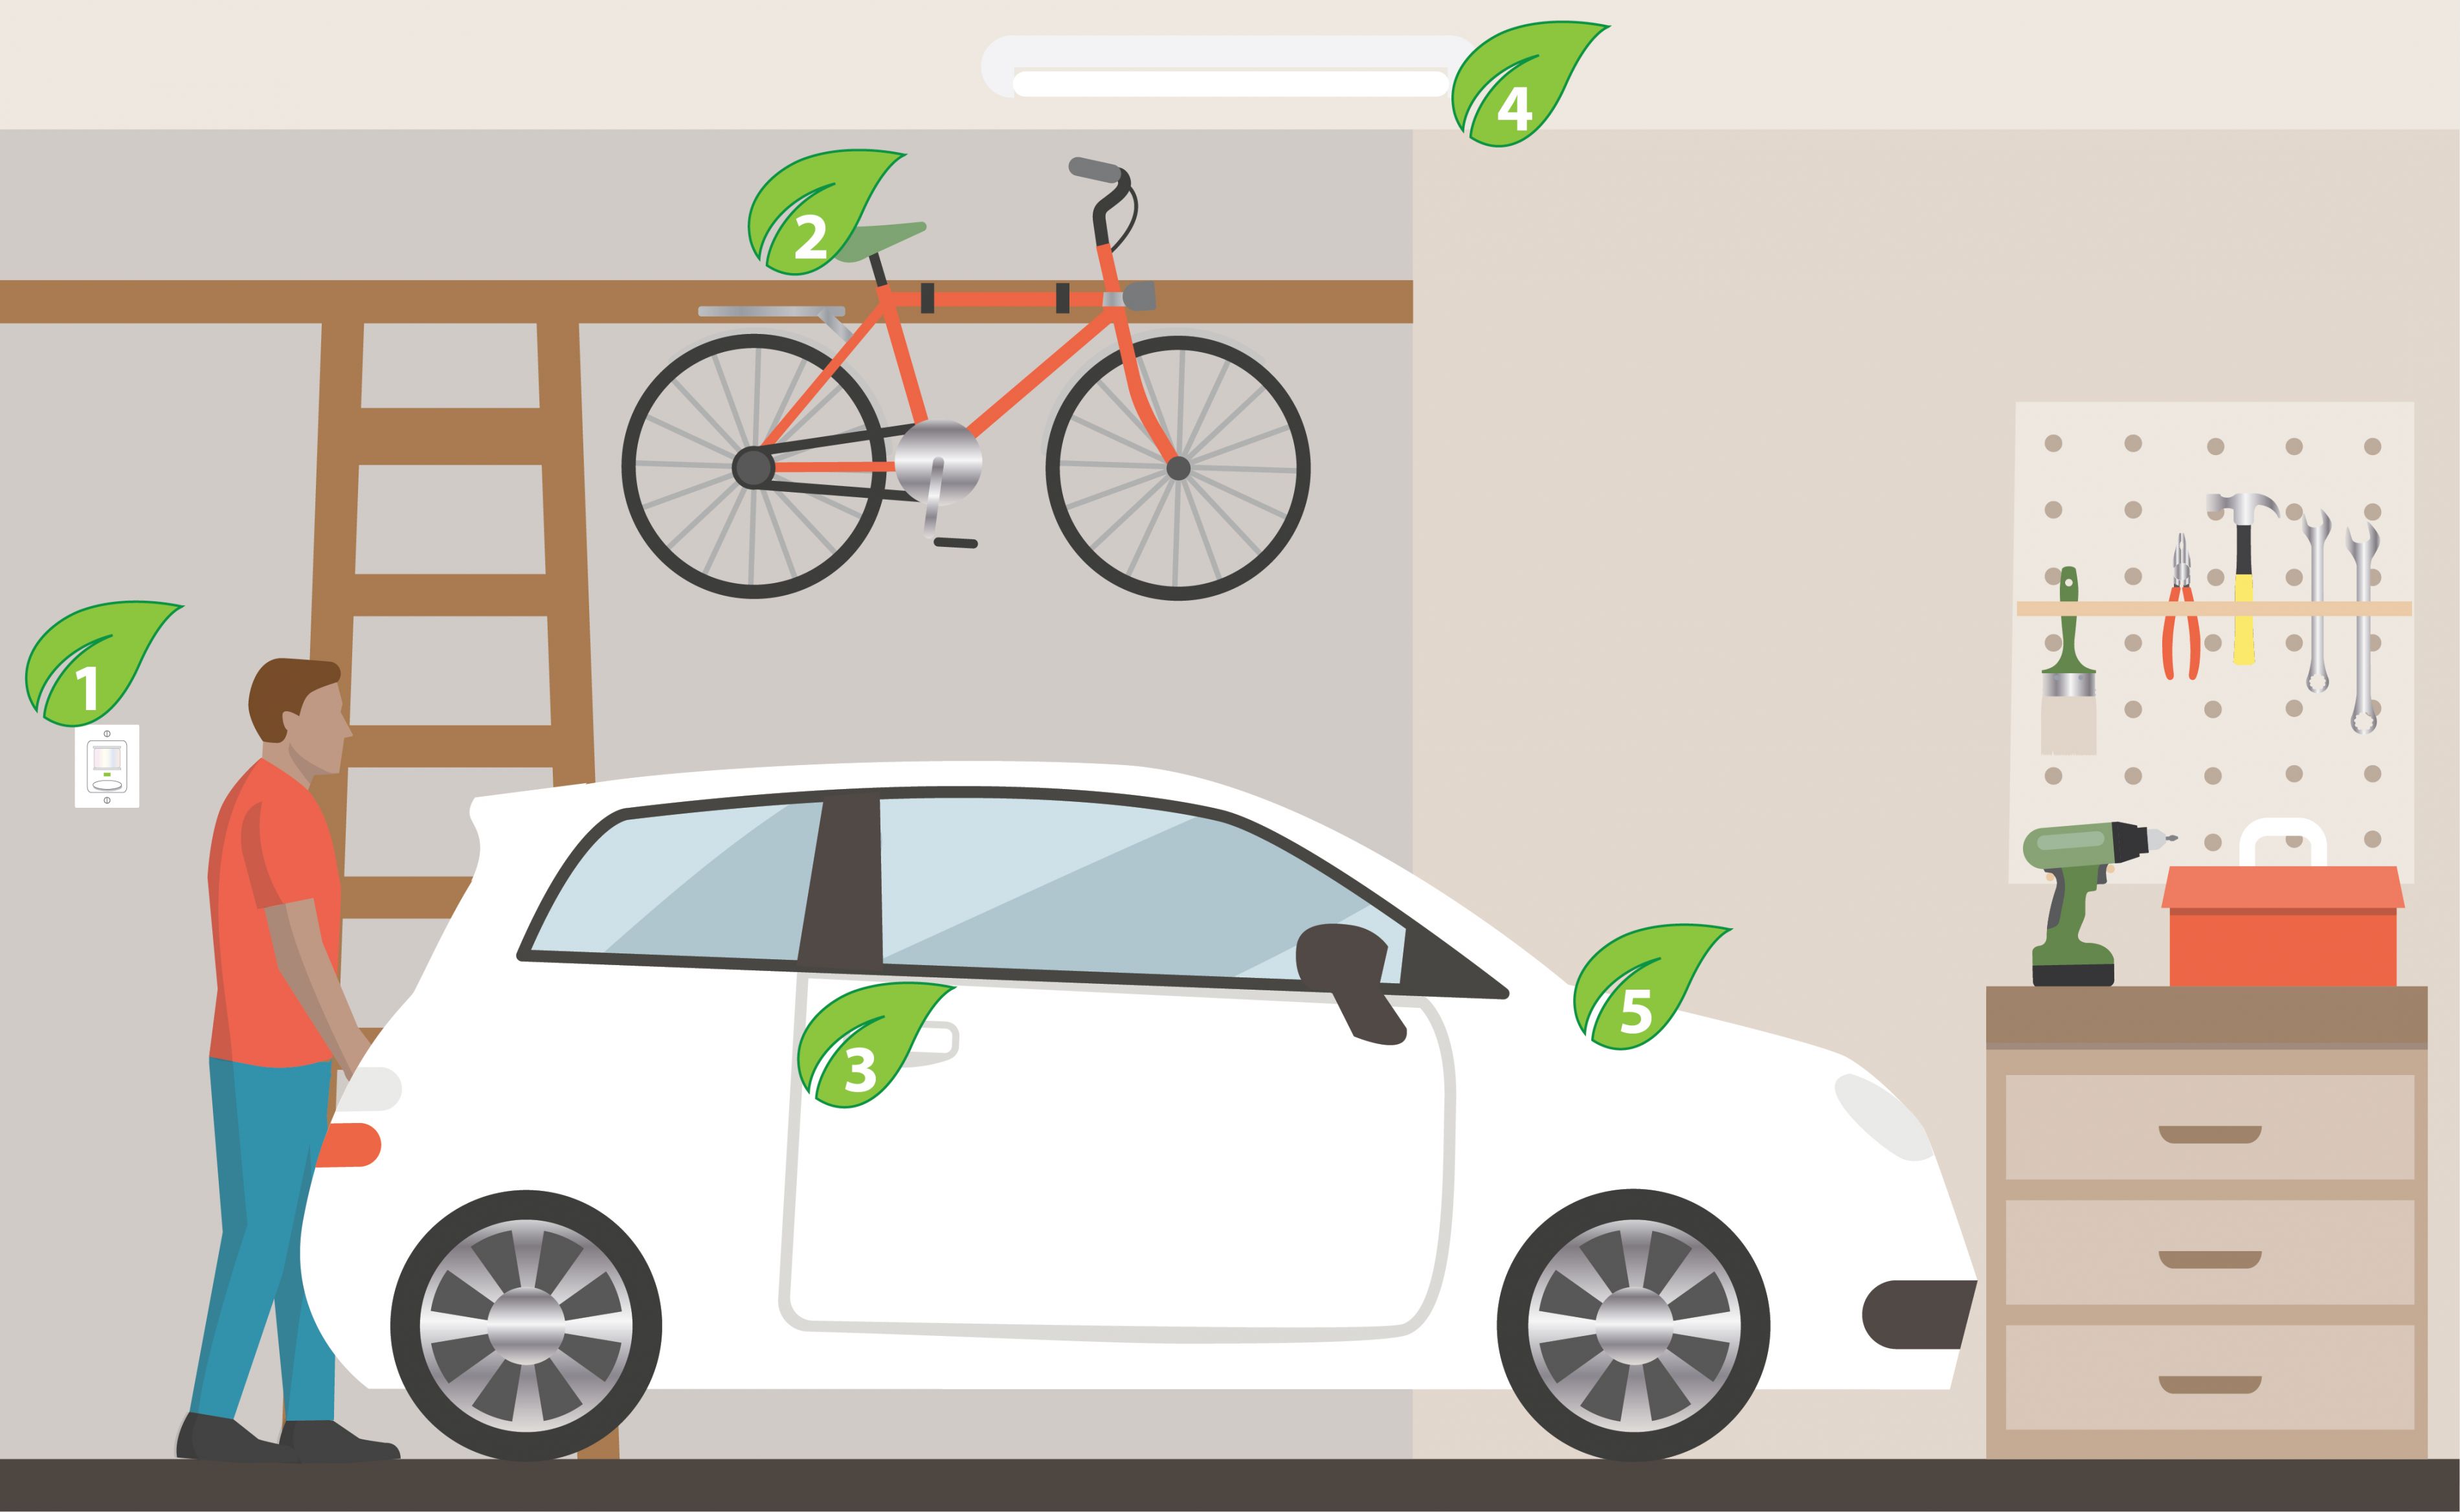 The garage of a home with five numbers identifying different areas of the room. 1) A light switch 2) A small car 3) A bicycle 4) A ceiling light fixture 5) A small car